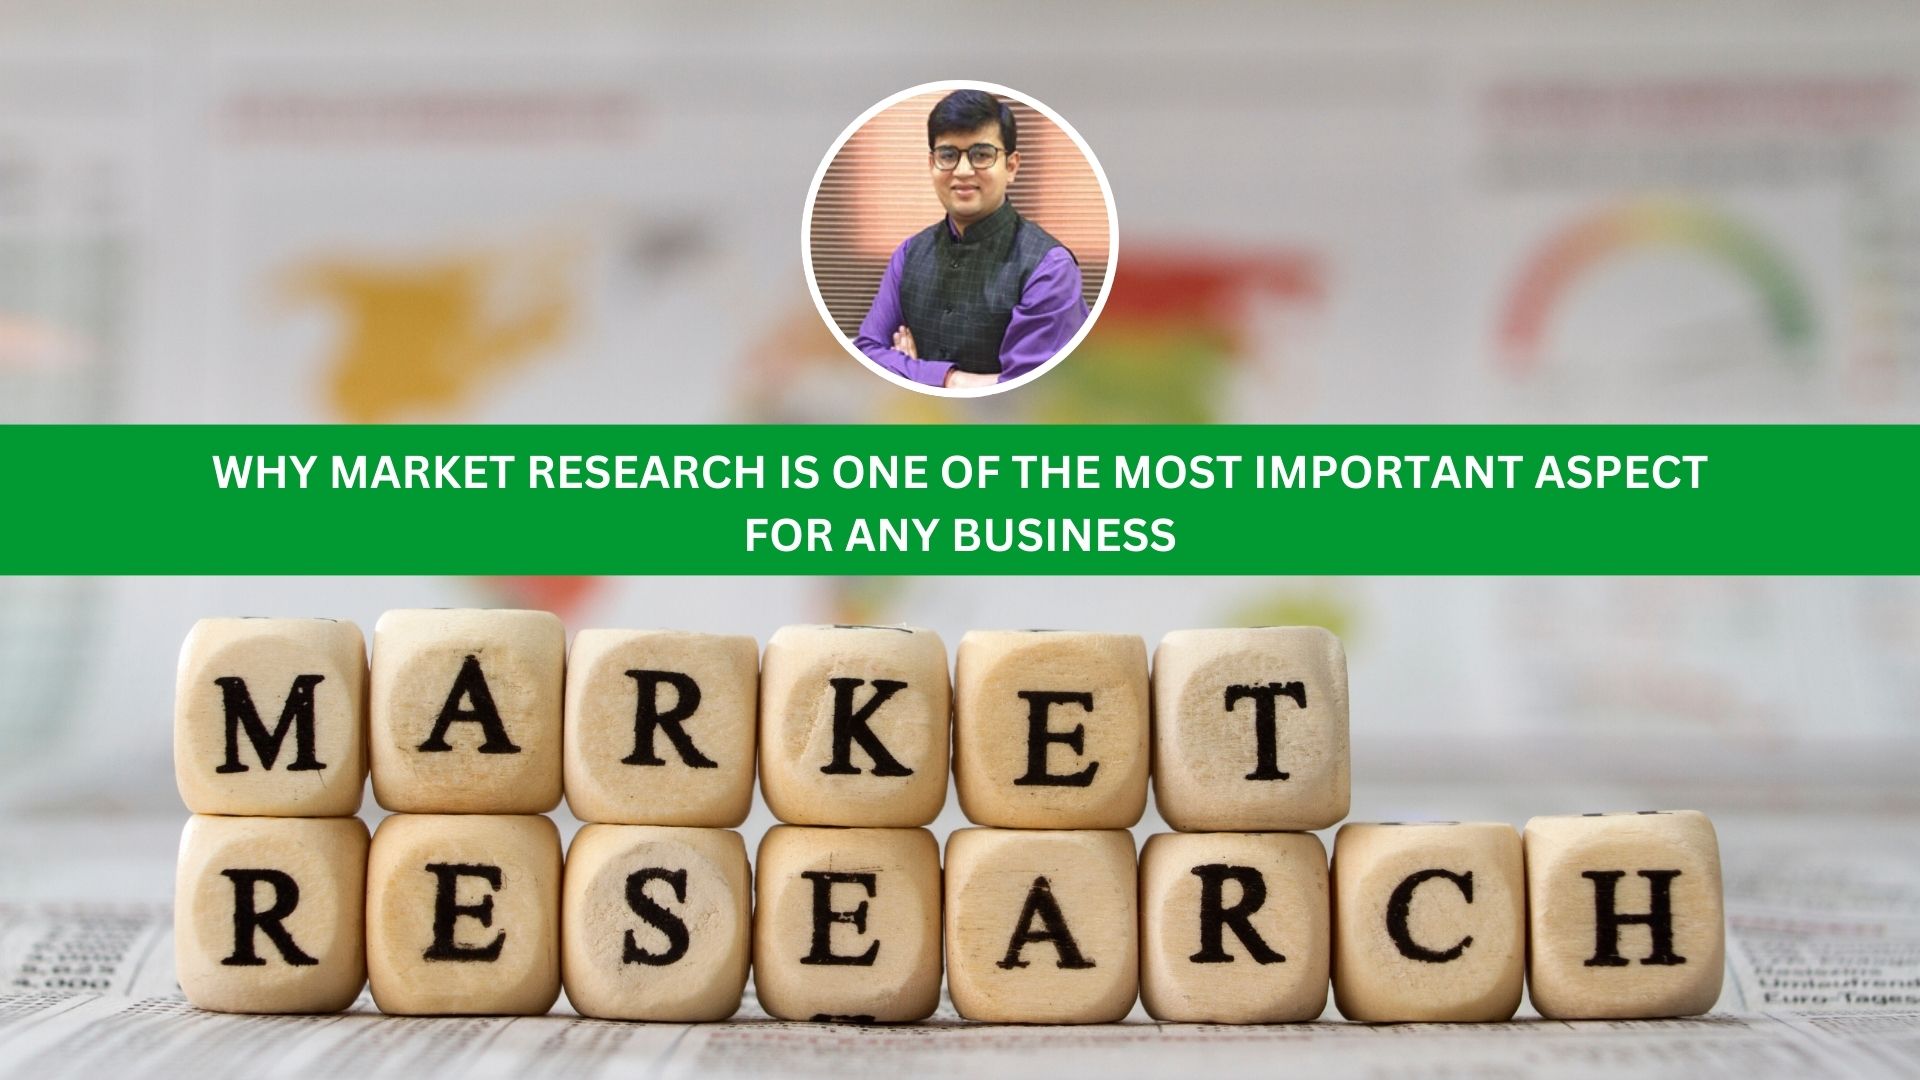 Why Market Research is one of the most important aspect for any business